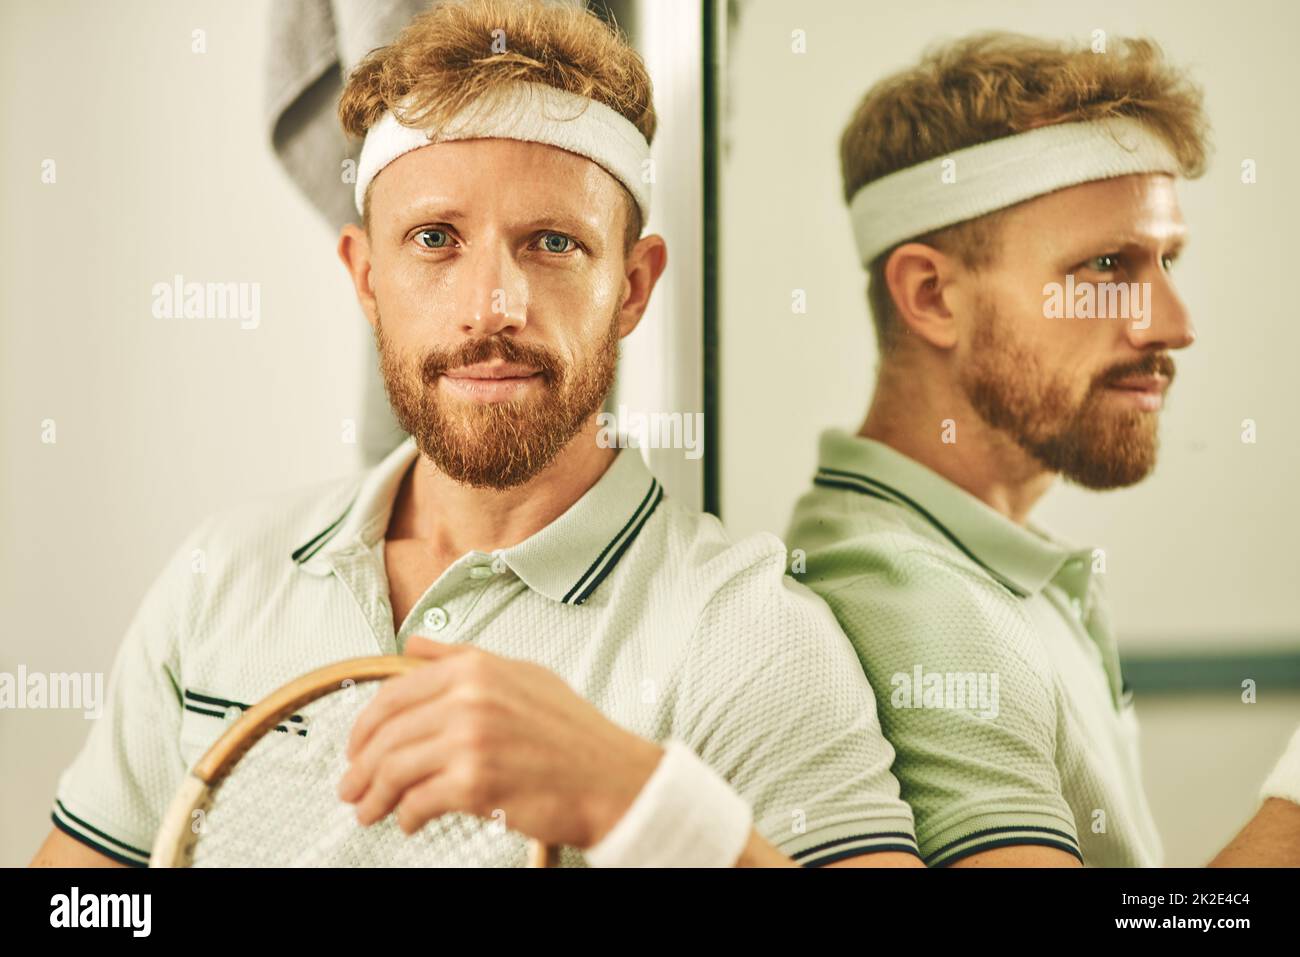 Squash, like tennis but better. Shot of a young man in the locker room after a game of squash. Stock Photo